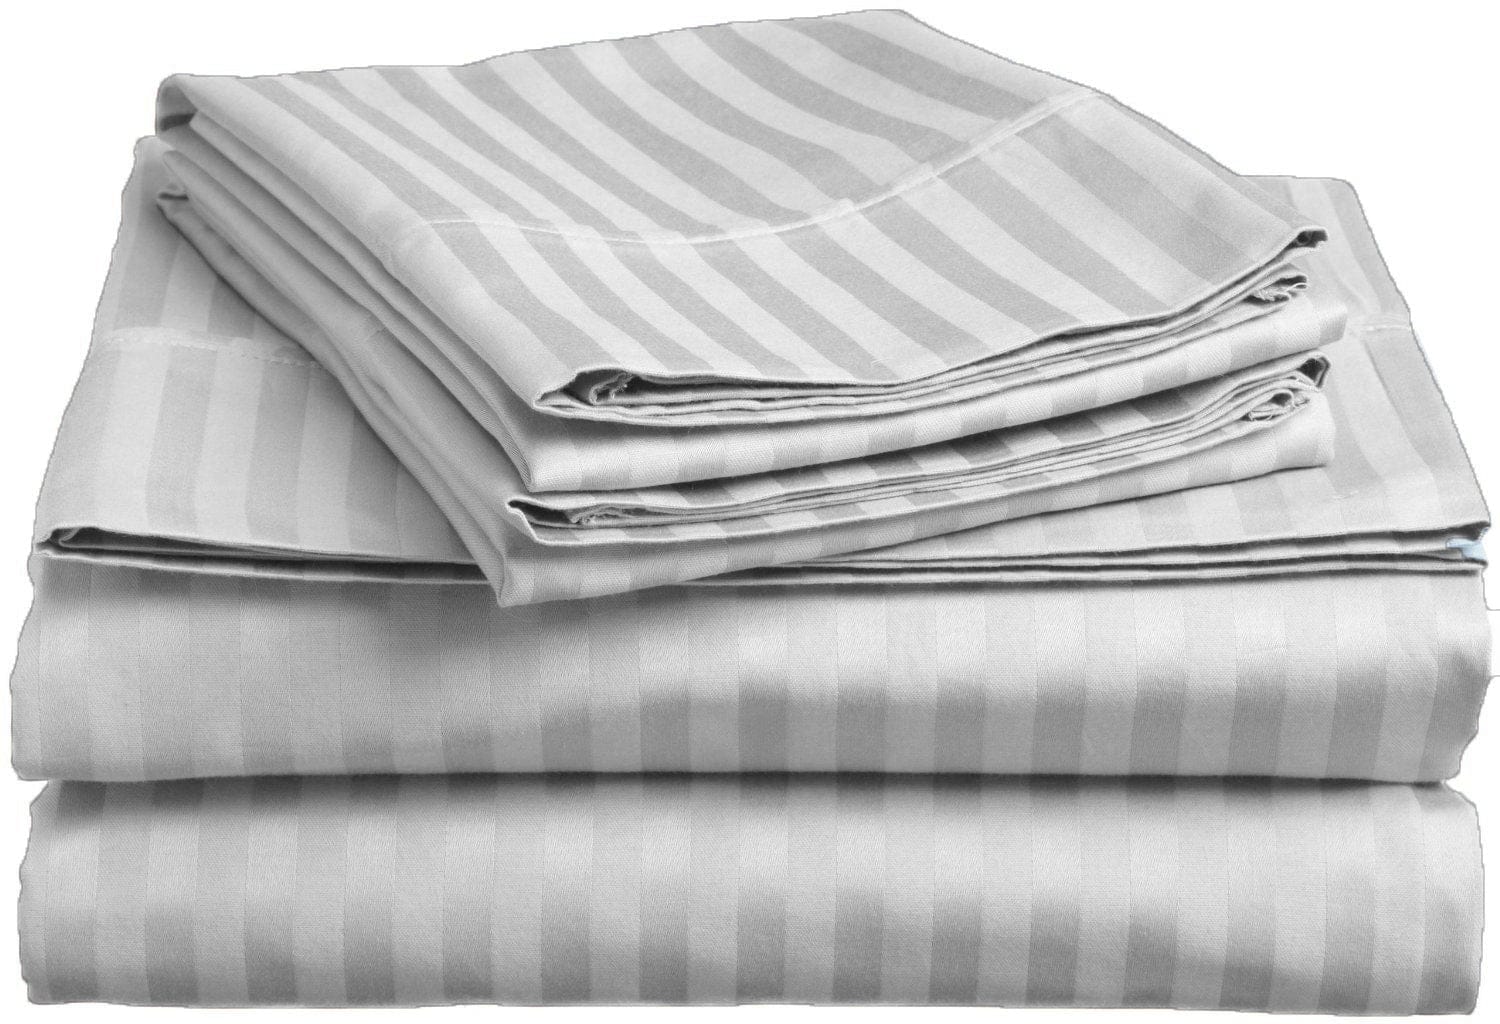 Satin Stripe Fitted Sheet with pillow covers- Light grey - DecorStudio - Fitted Sheet